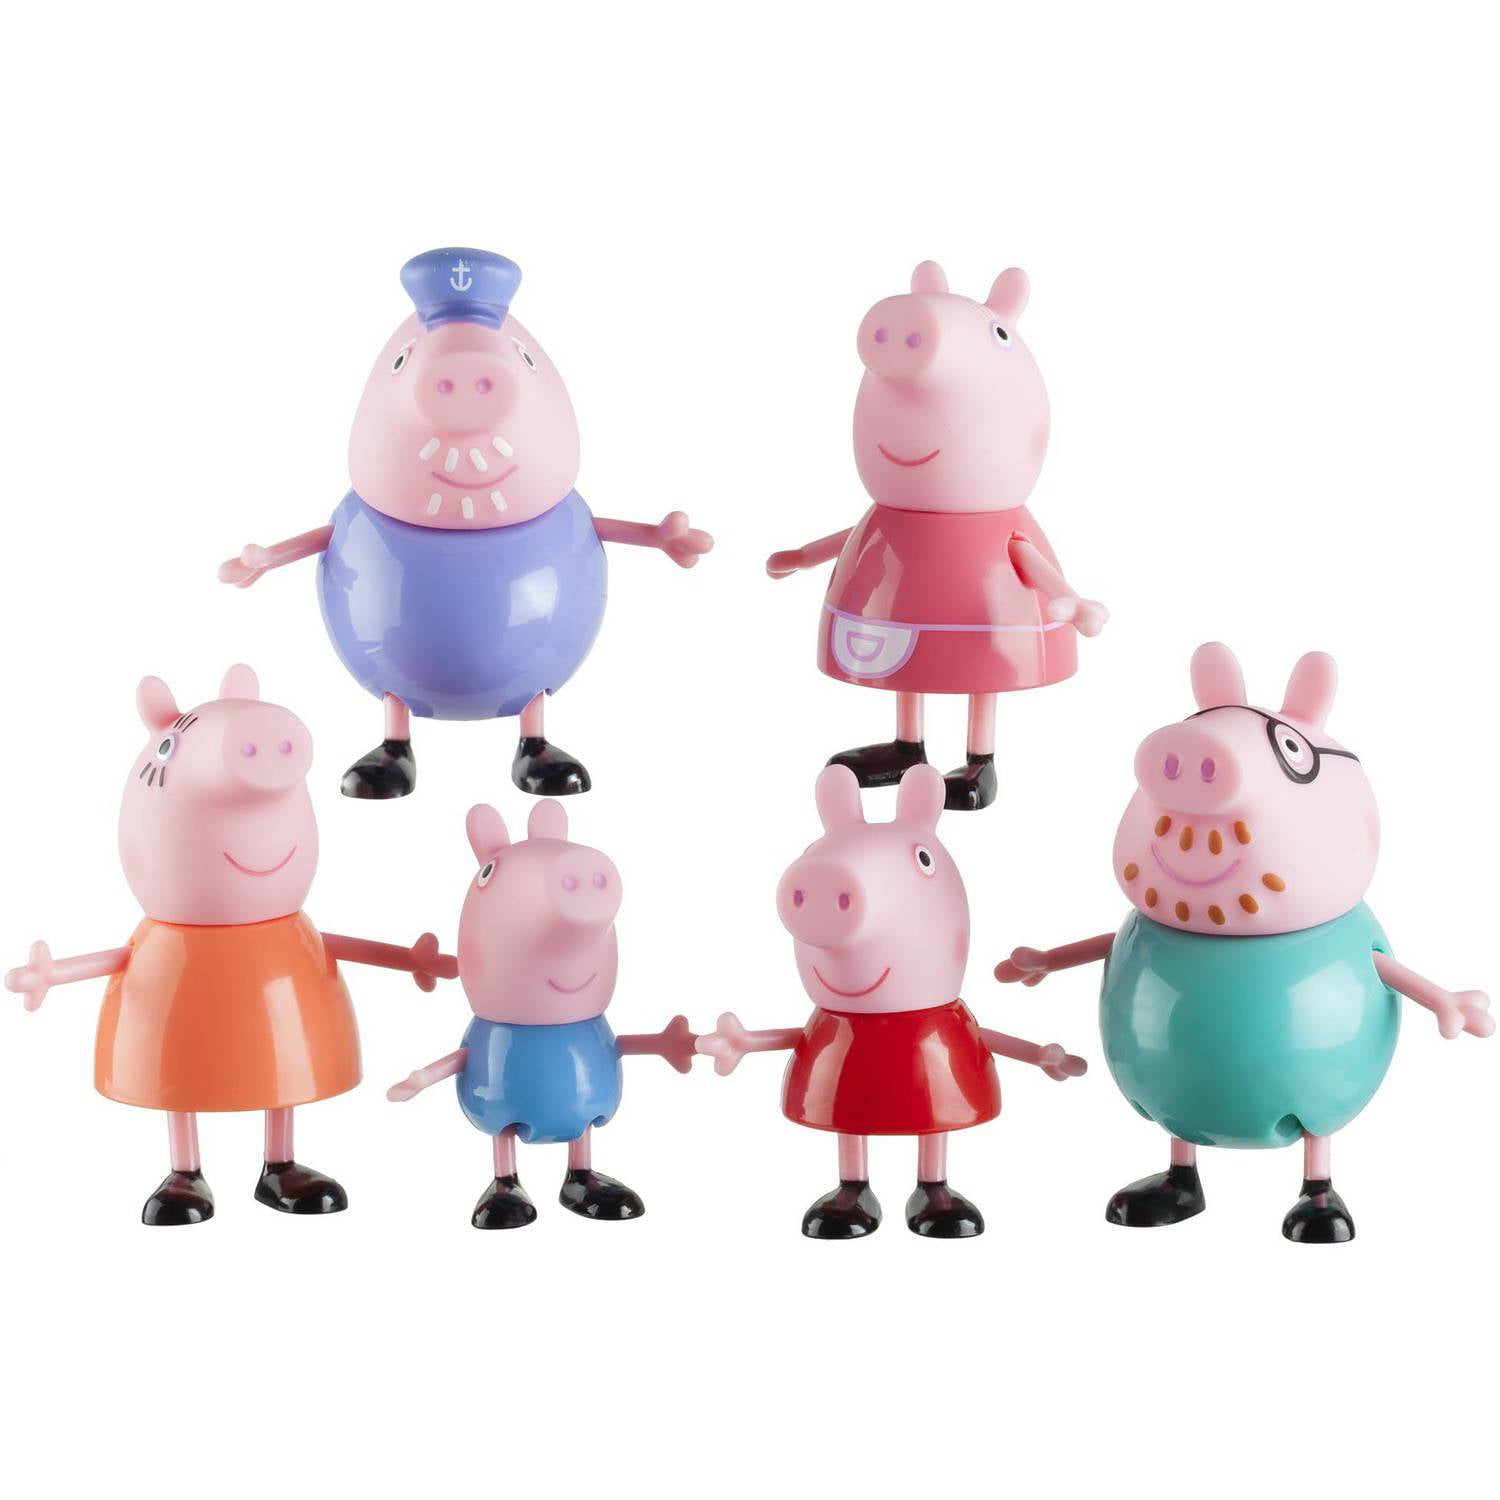 How Tall Is Peppa Pig? According to the Internet, Over 7 Feet Tall